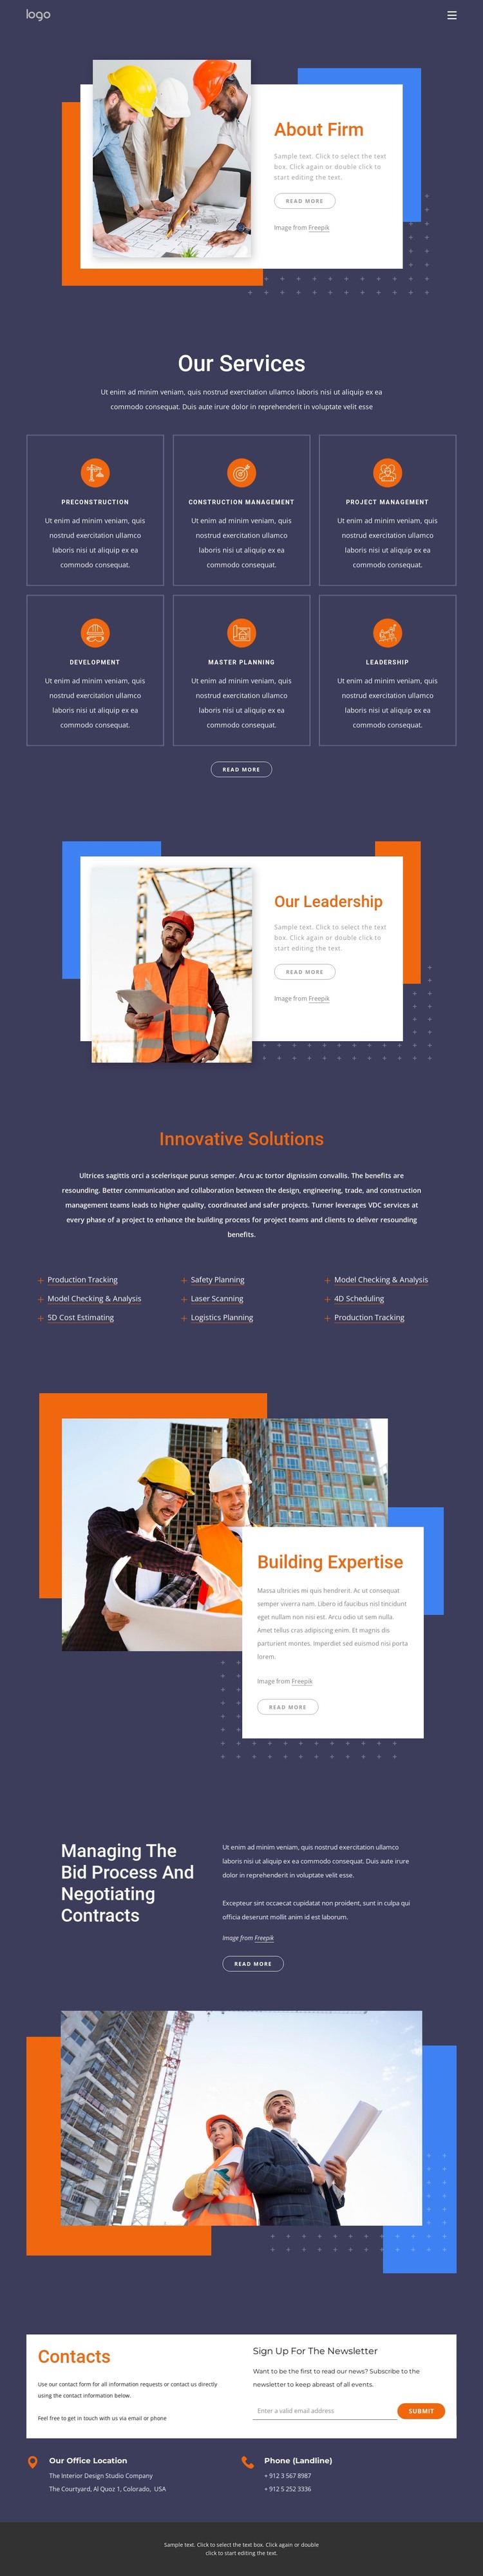 We build the structures and infrastructure Web Design